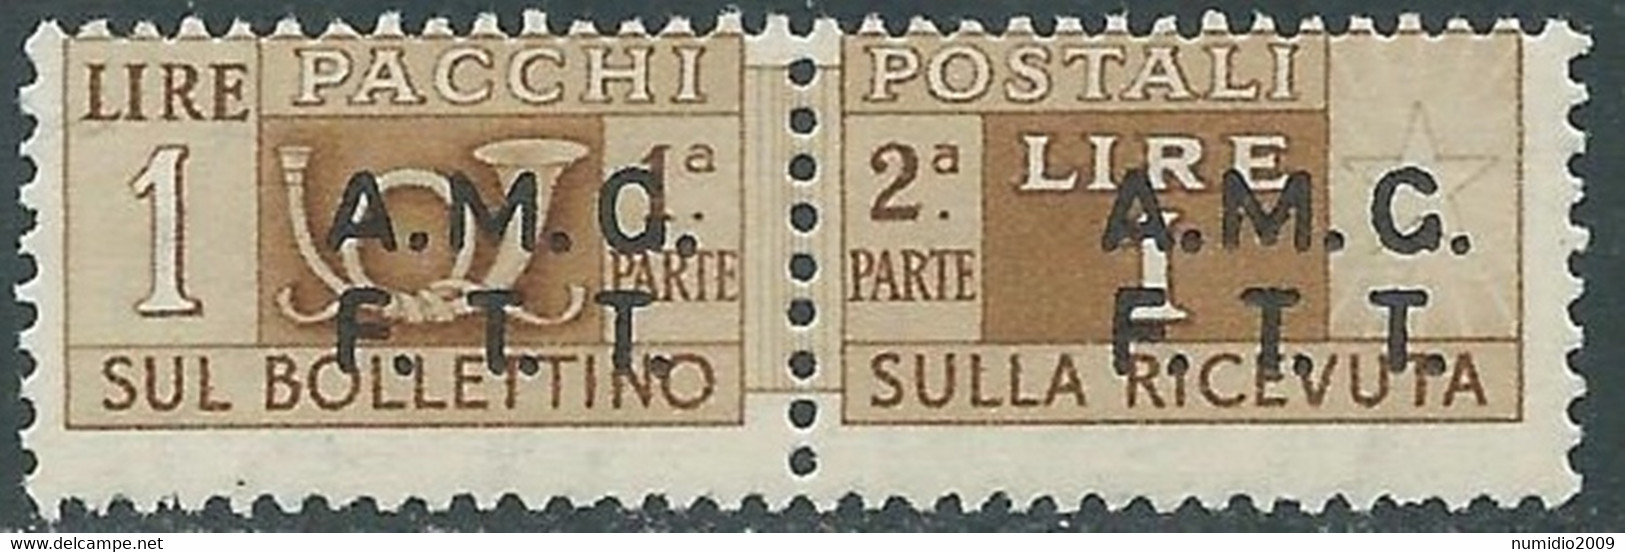 1947-48 TRIESTE A PACCHI POSTALI 1 LIRA MNH ** - RE24-9 - Postal And Consigned Parcels